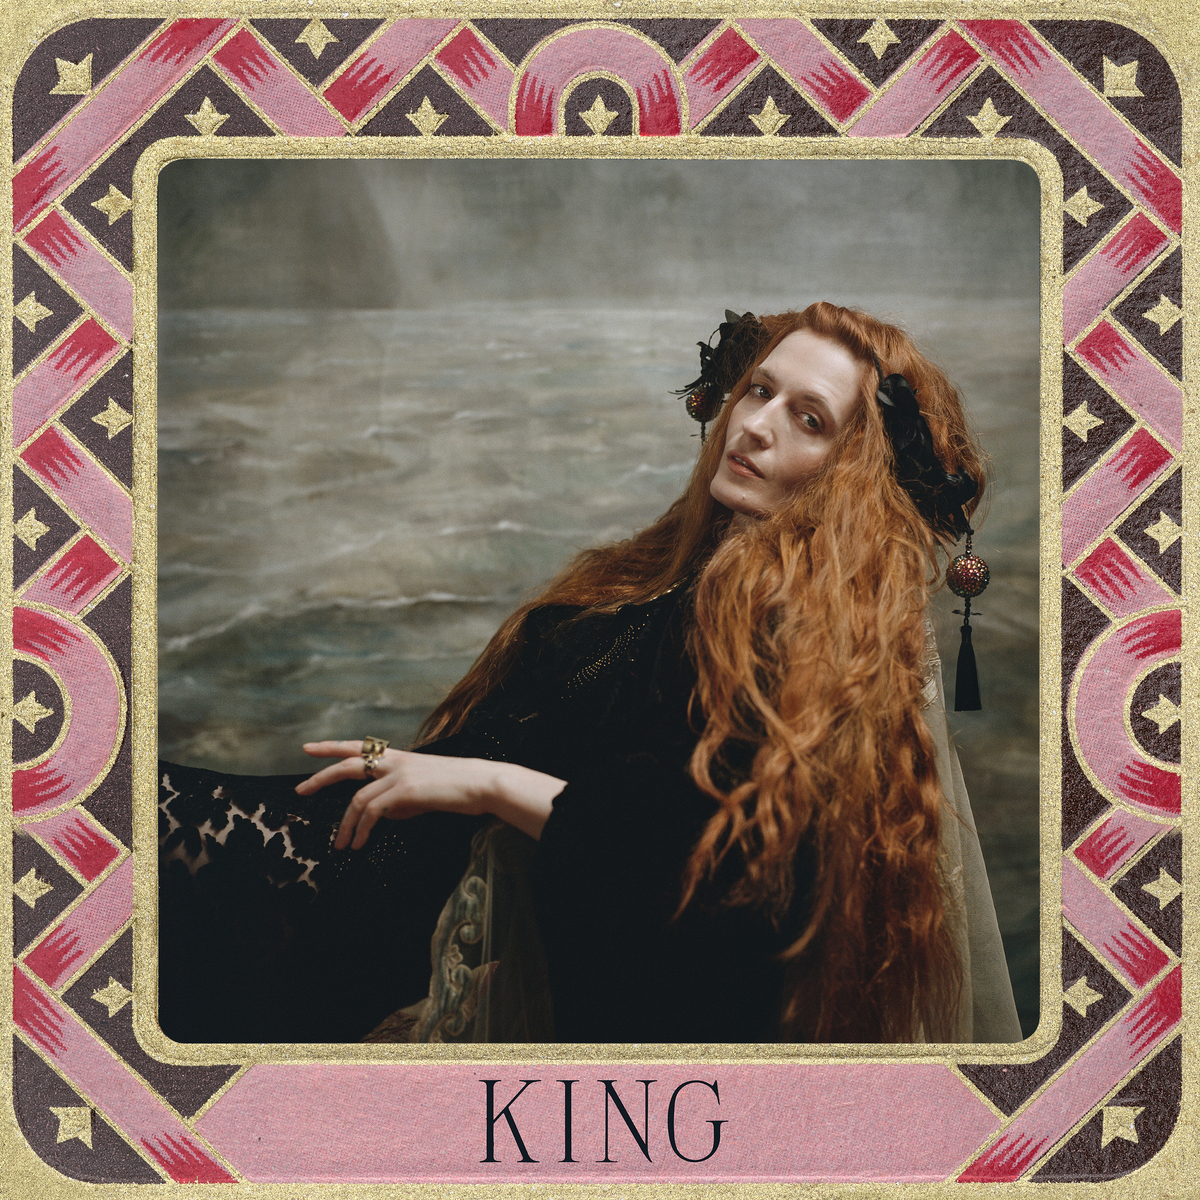 Florence + The Machine – “King”